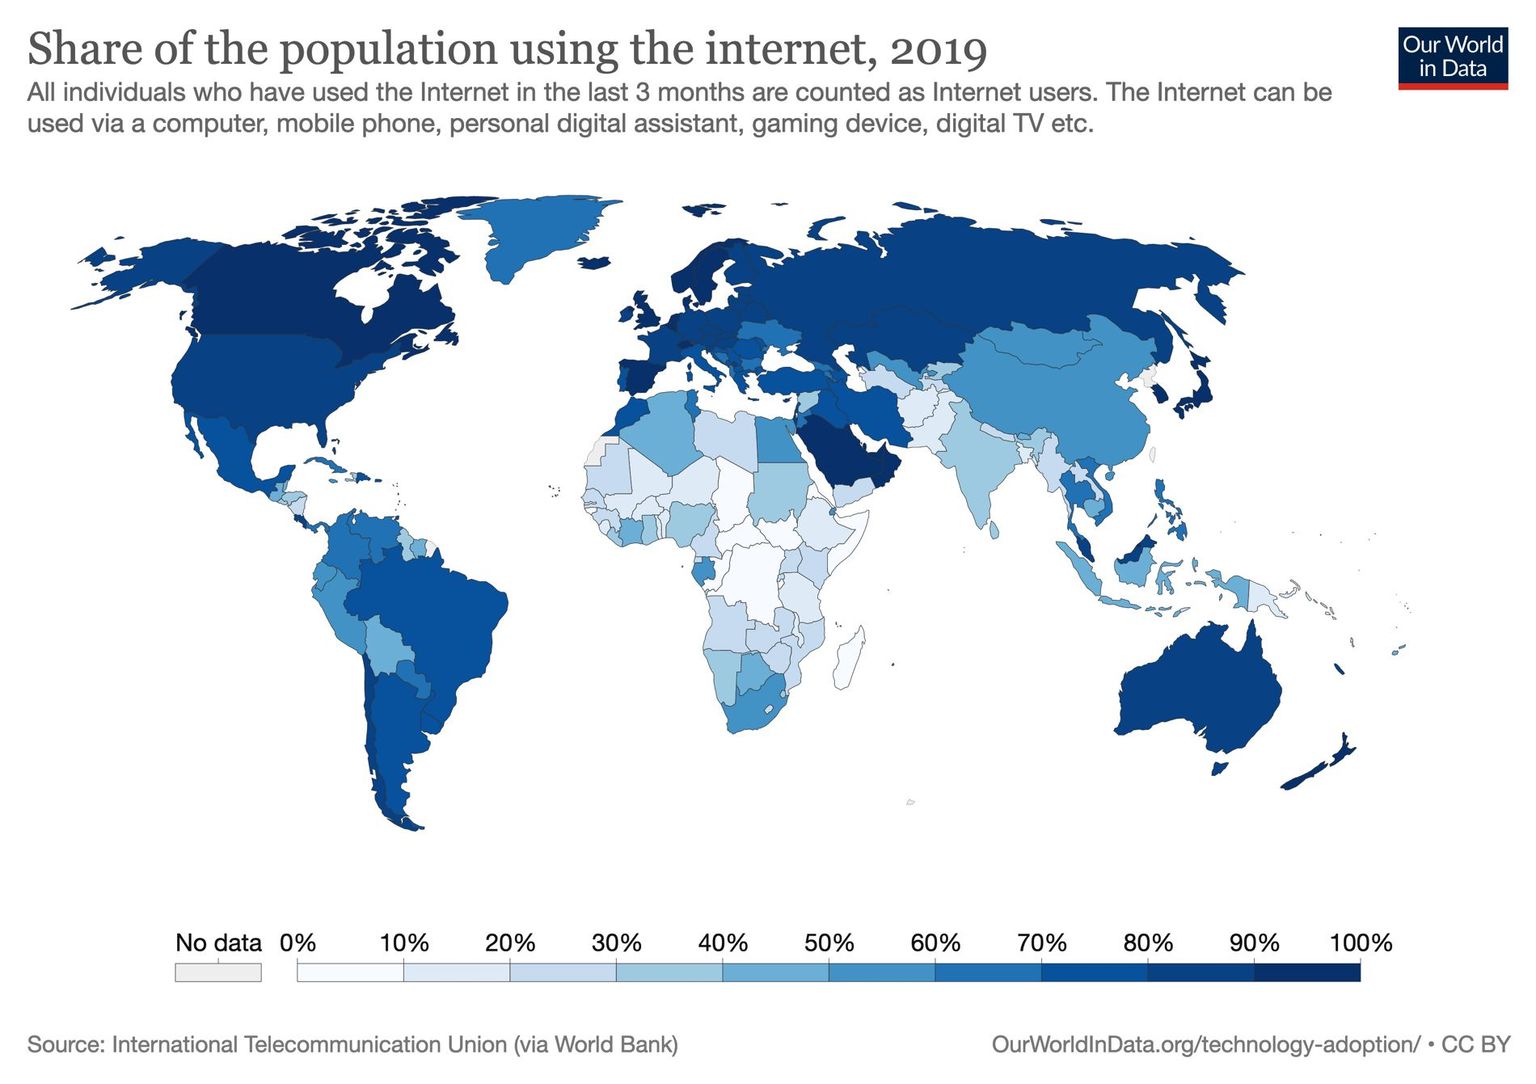 Share of global population using the internet, 2019